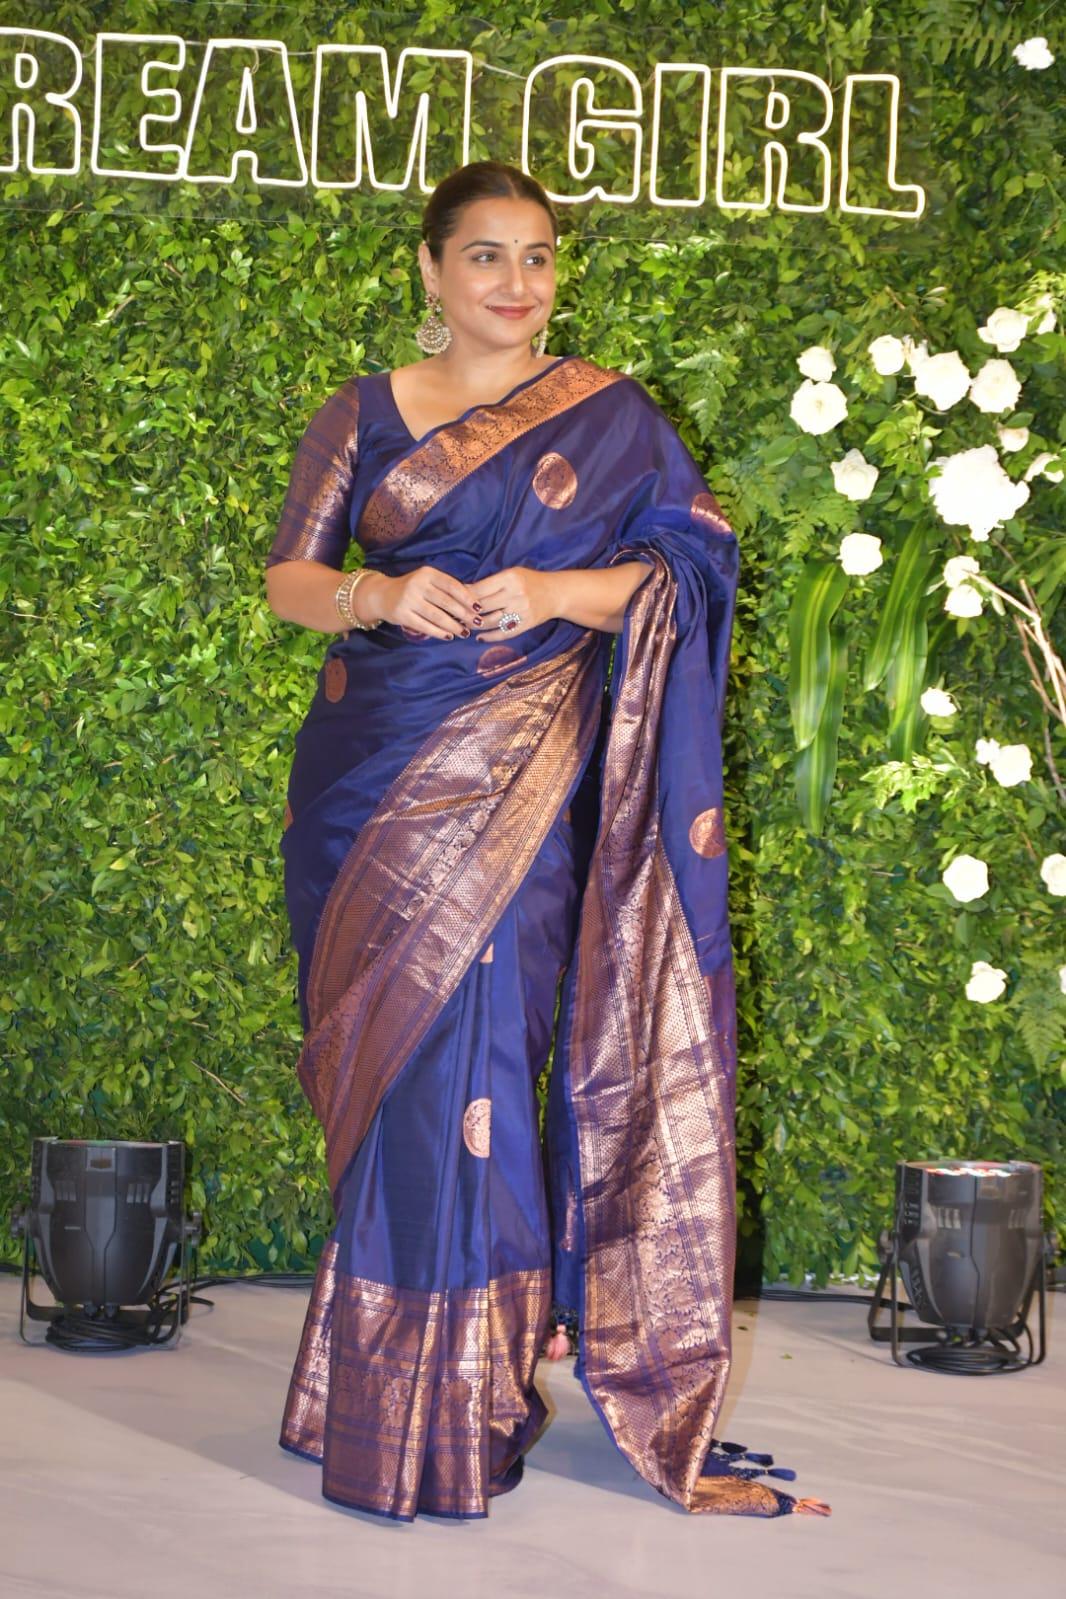 Vidya Balan was snapped at the event in a classic indigo-blue saree